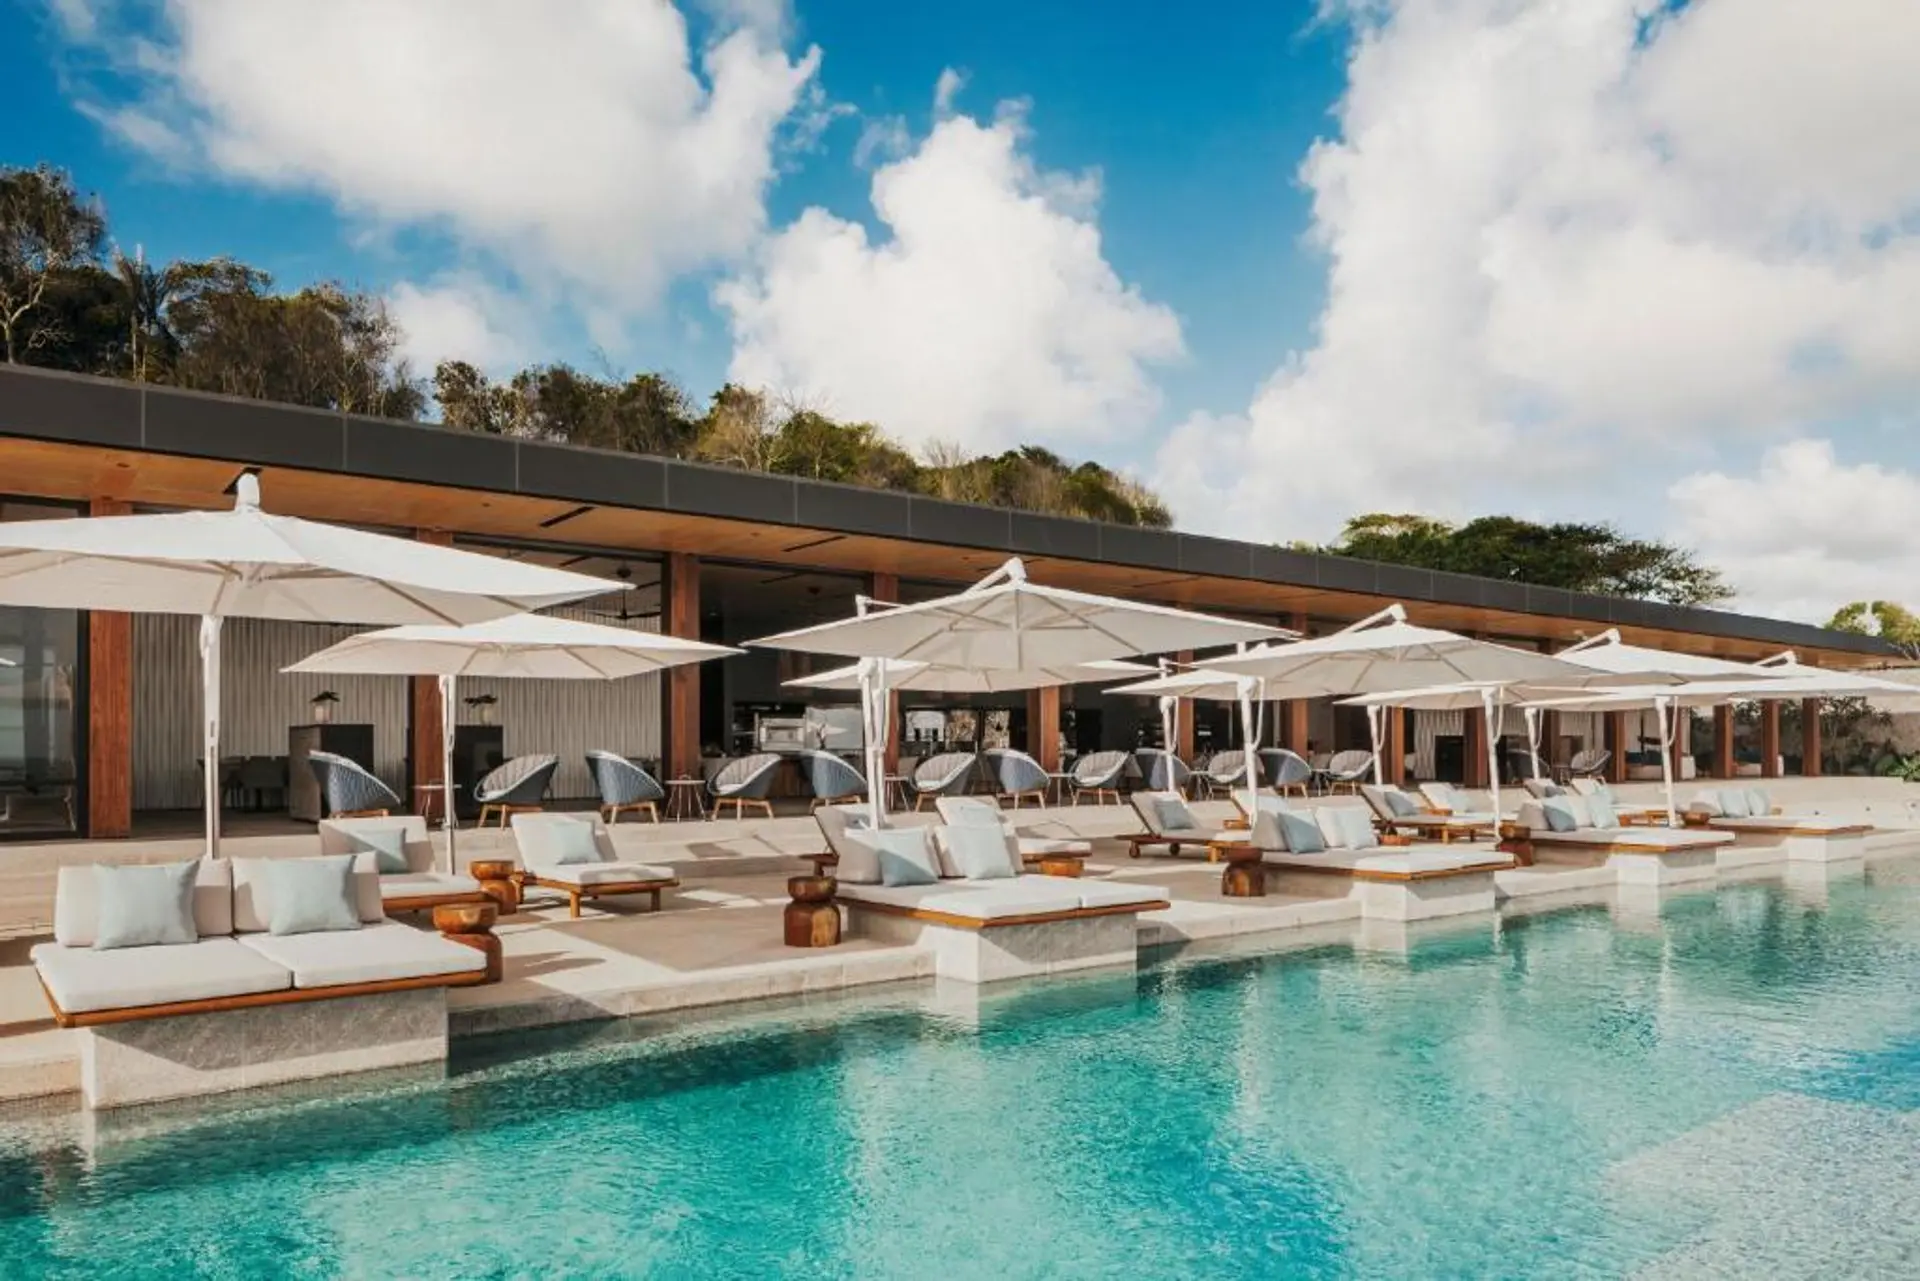 Hotels News - One & Only's first resort in Southeast Asia has opened